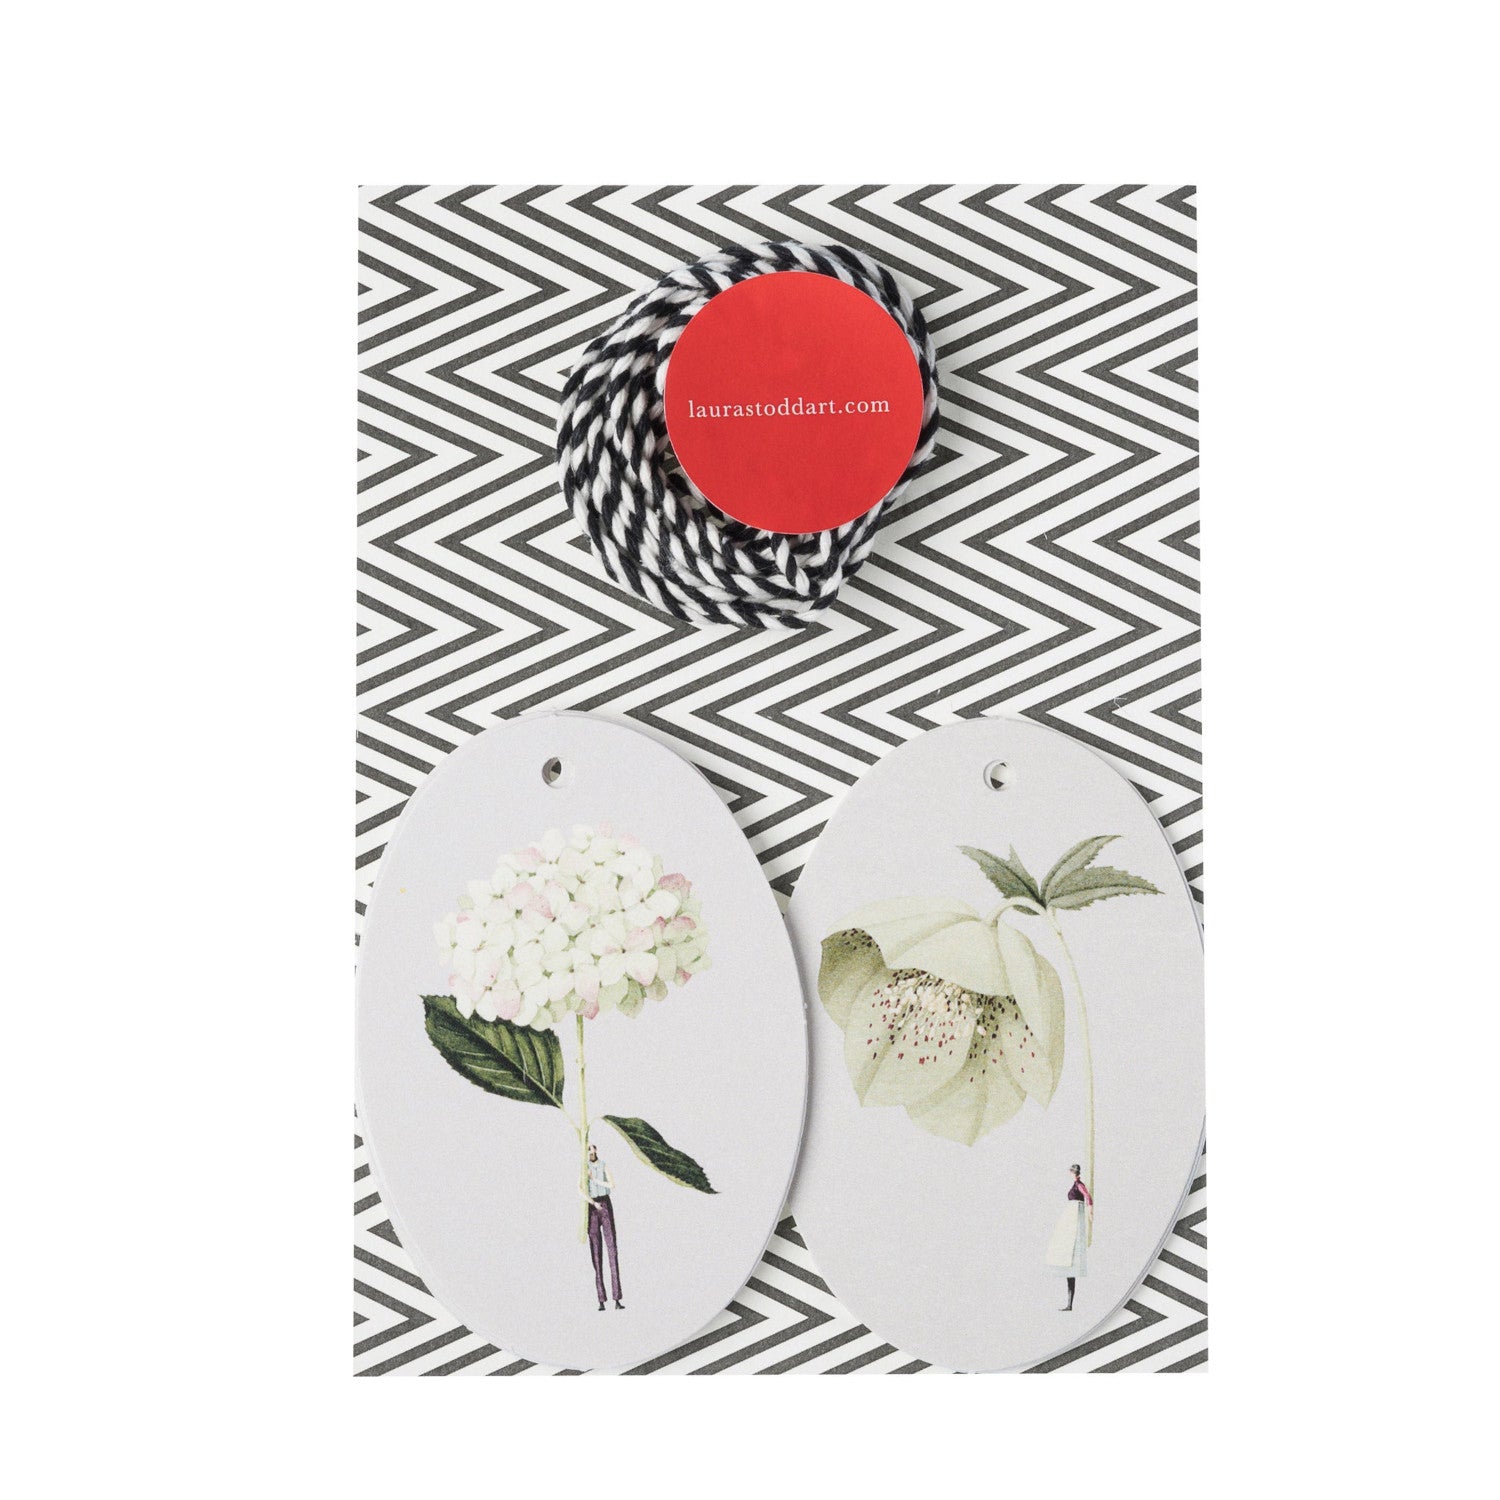 Two round In Bloom Green Gift Tags with floral designs on a geometric patterned background, made in England by Hester &amp; Cook, with a red circular sticker bearing a website link.